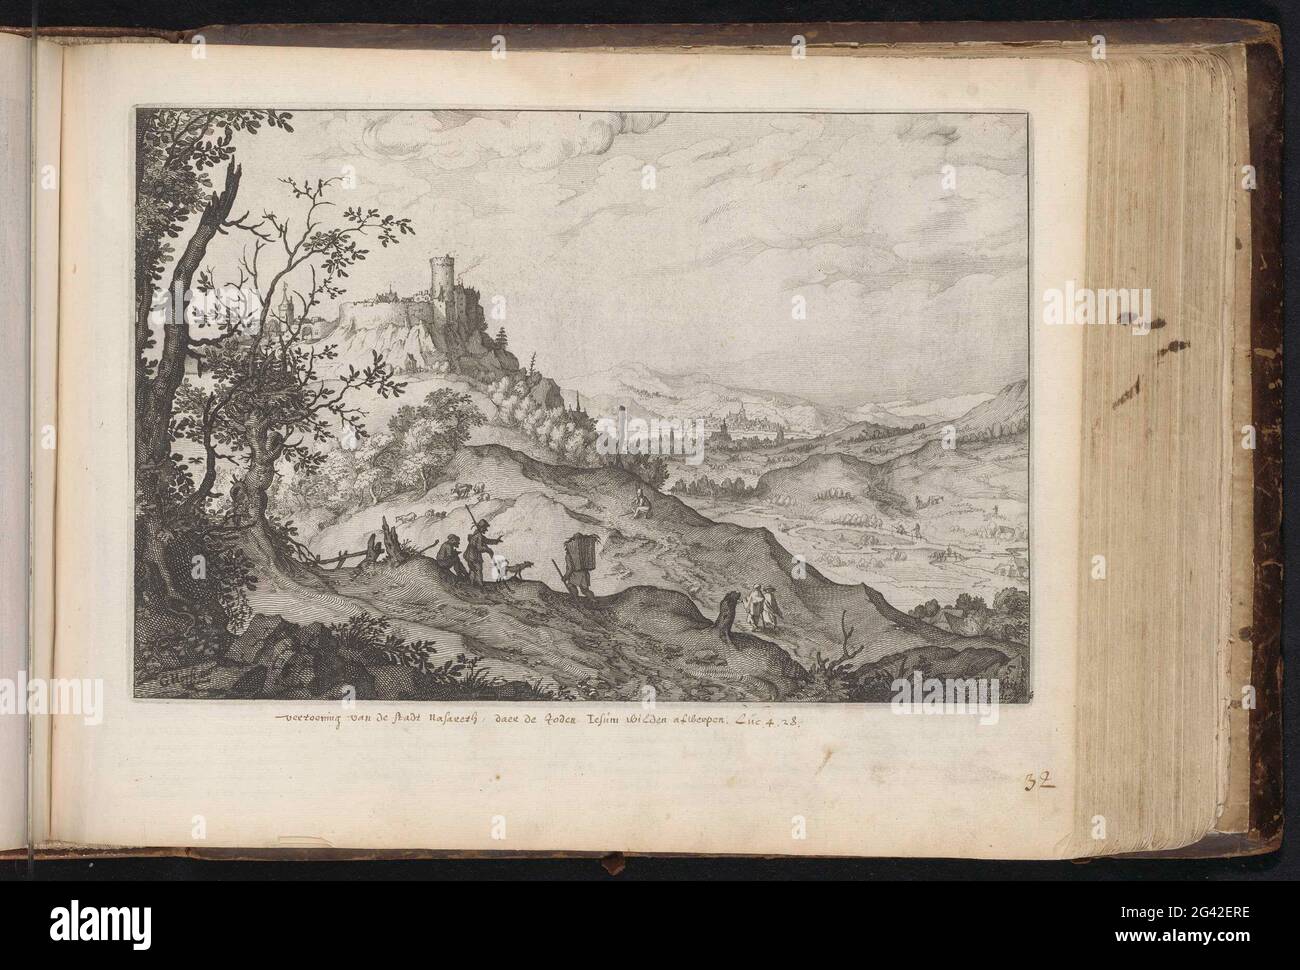 Mountain landscape with hikers and shepherds; Landscape with the fall of Icarus; Exhibition of the city of Nasareth, where the Jews wanted to shed Iesum; Of the principles of the Christi Predication; Den Grooten Figuer Bibel (...). Mountain landscape with hikers and shepherds. On the left on a hill a walled city with a castle. Due to the valley, a river flows where two fishermen have thrown their rod. According to the handwritten caption, it is a face of Nazaret where the Jews wanted to push Christ in the abyss. This print is part of an album. Stock Photo